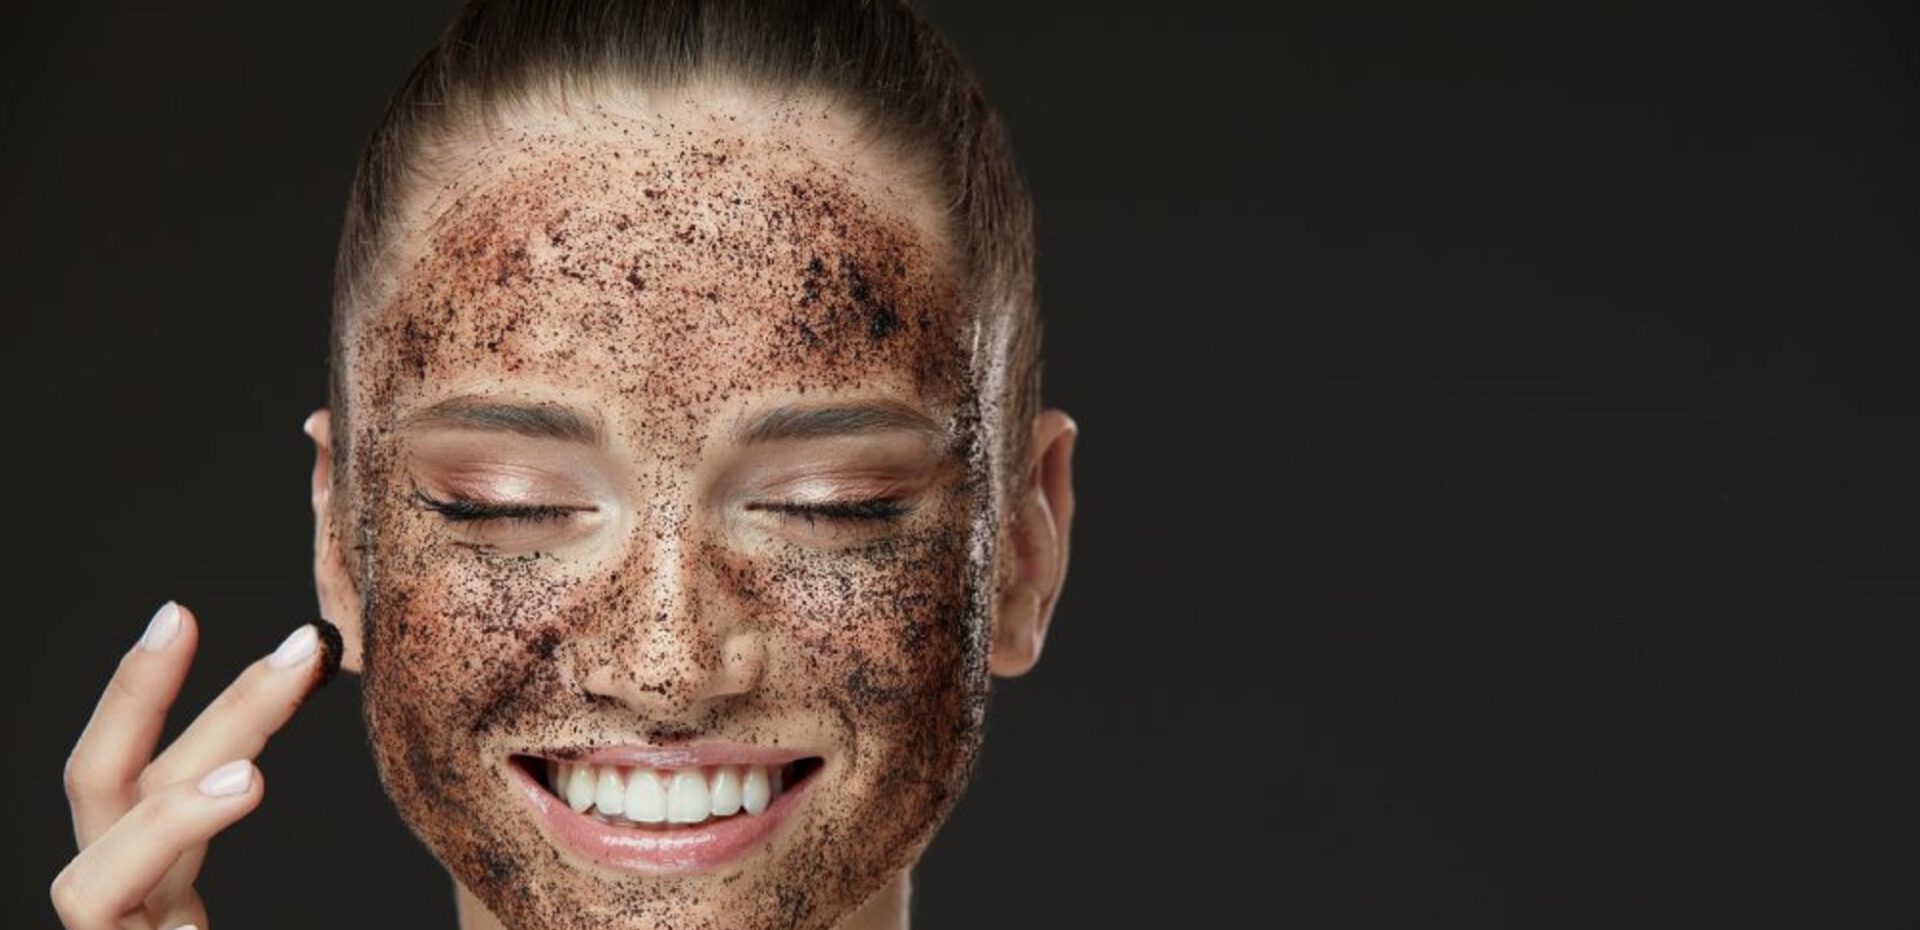 coffees effects on your skin 1587677445 12 1920x930 1